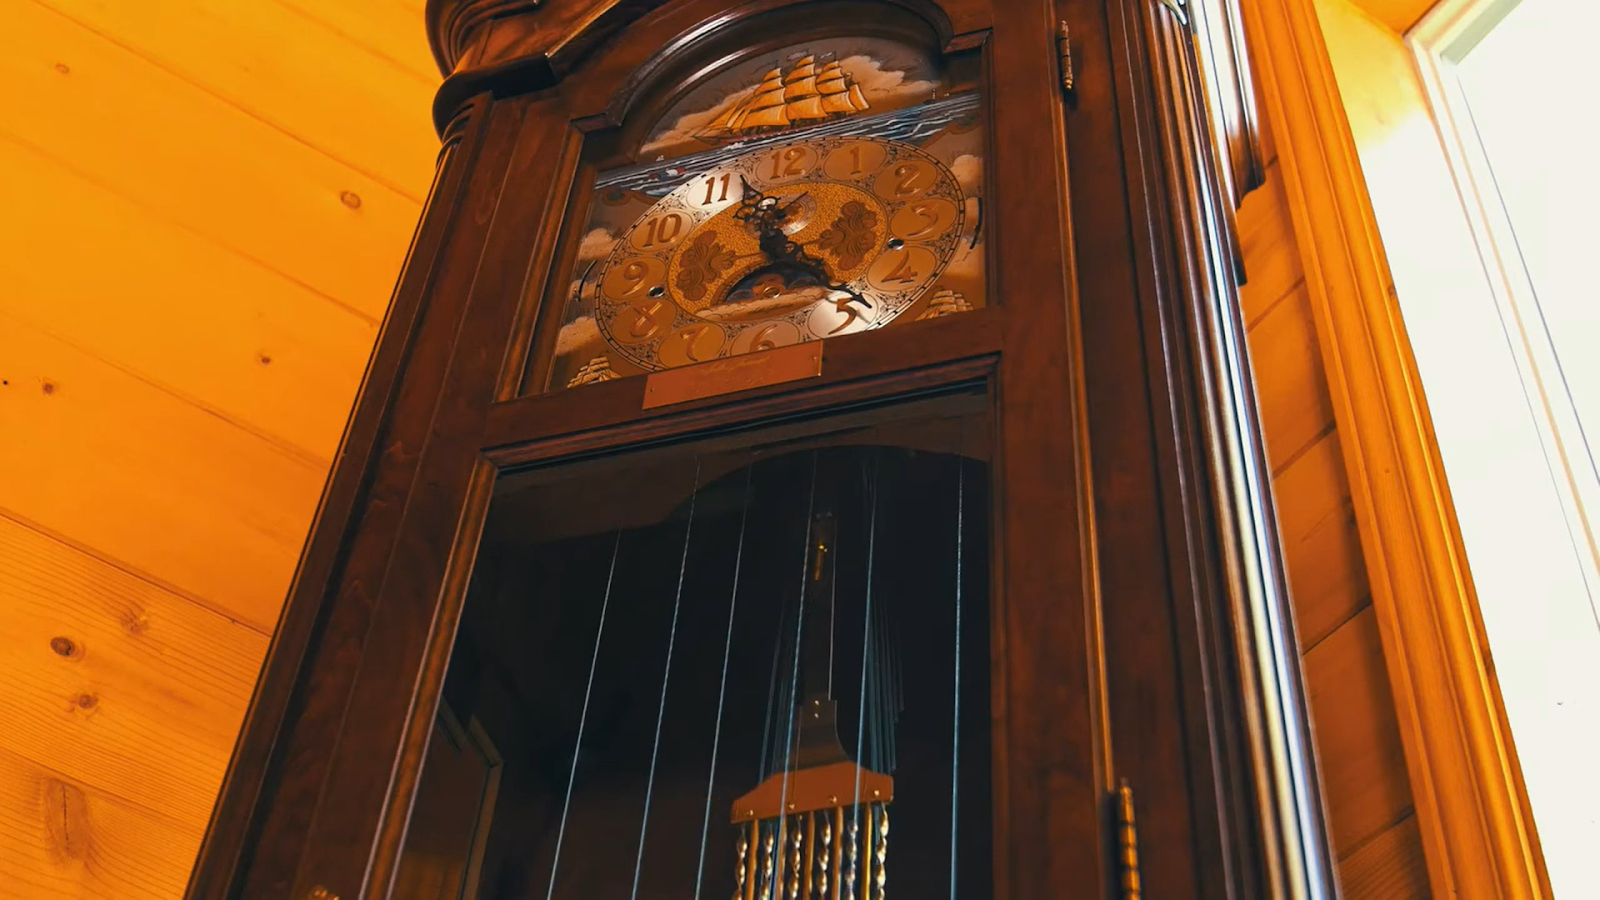 A grand wooden grandfather clock with ornate gold detailing stands